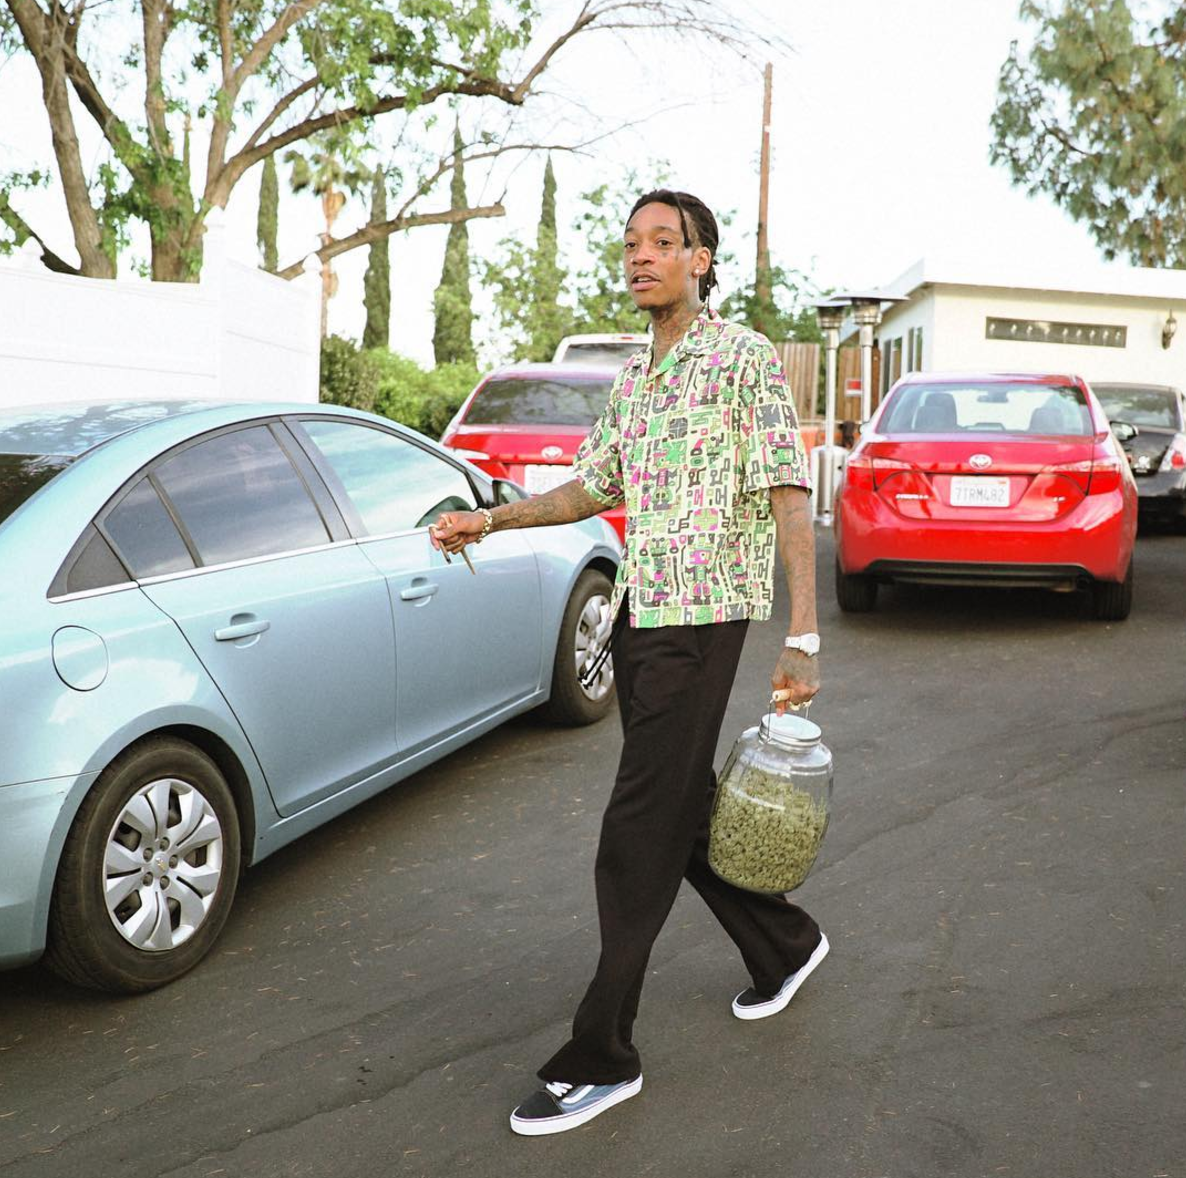 SPOTTED: Wiz Khalifa In Green Shirt And Old Skool Vans